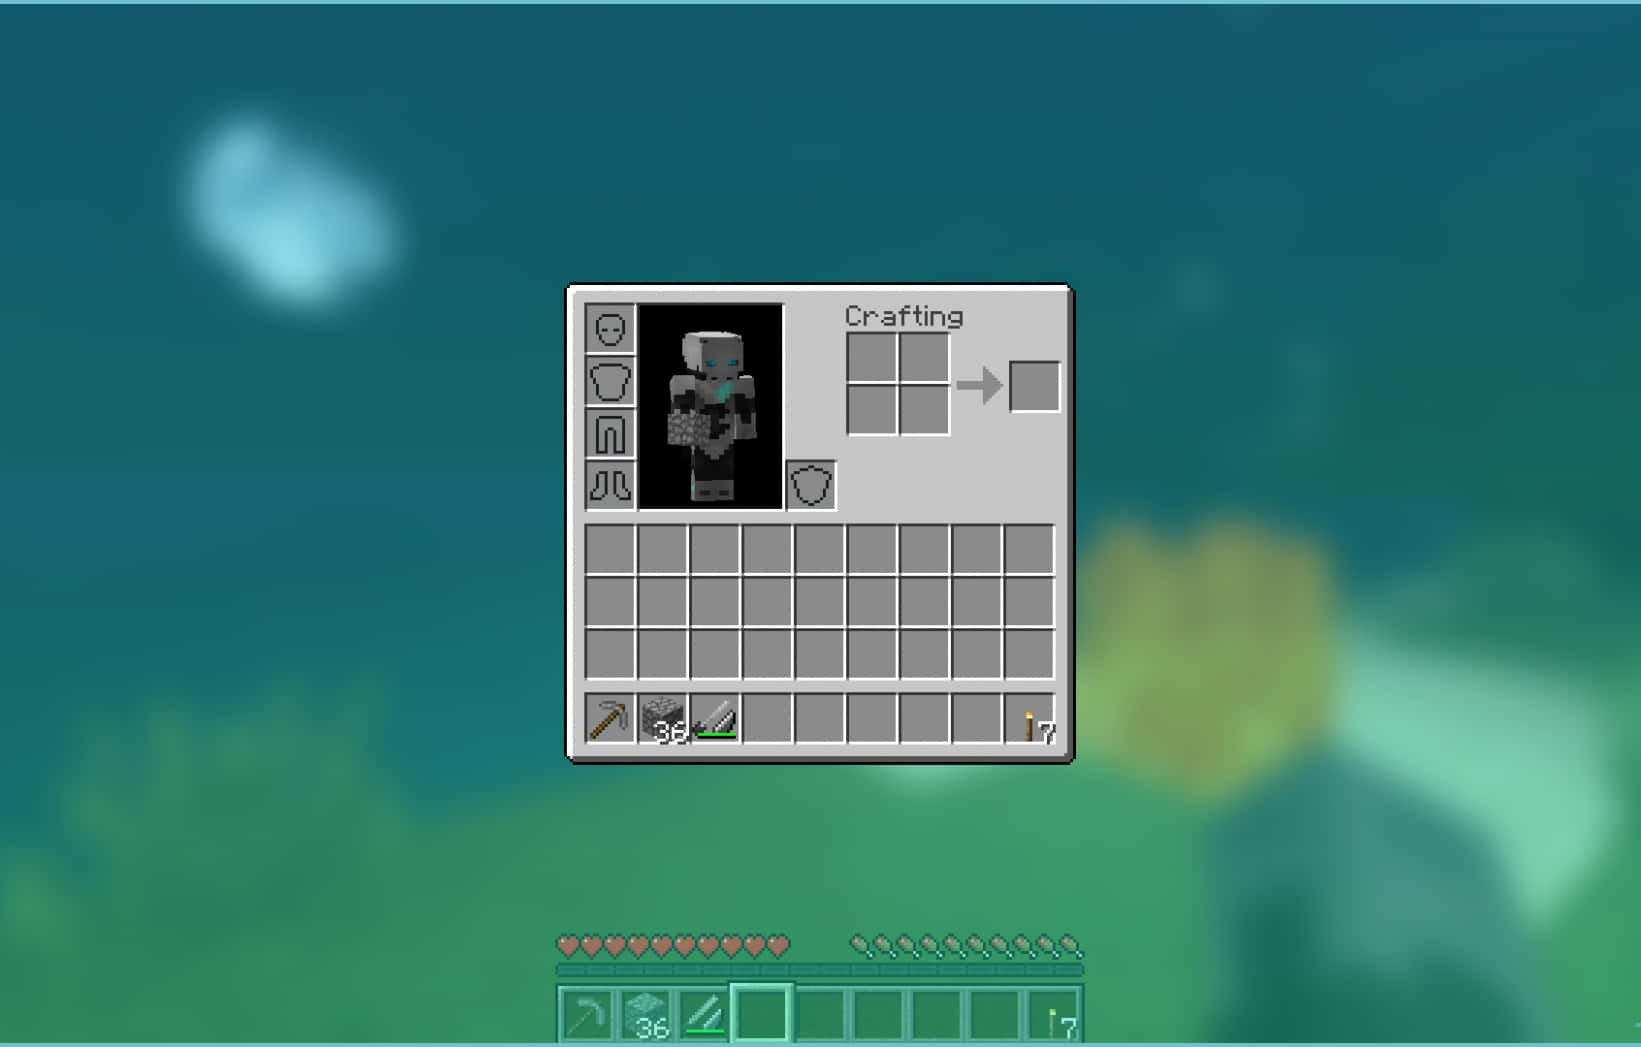 Minecraft Crafting Inventory On Blurry Wallpaper